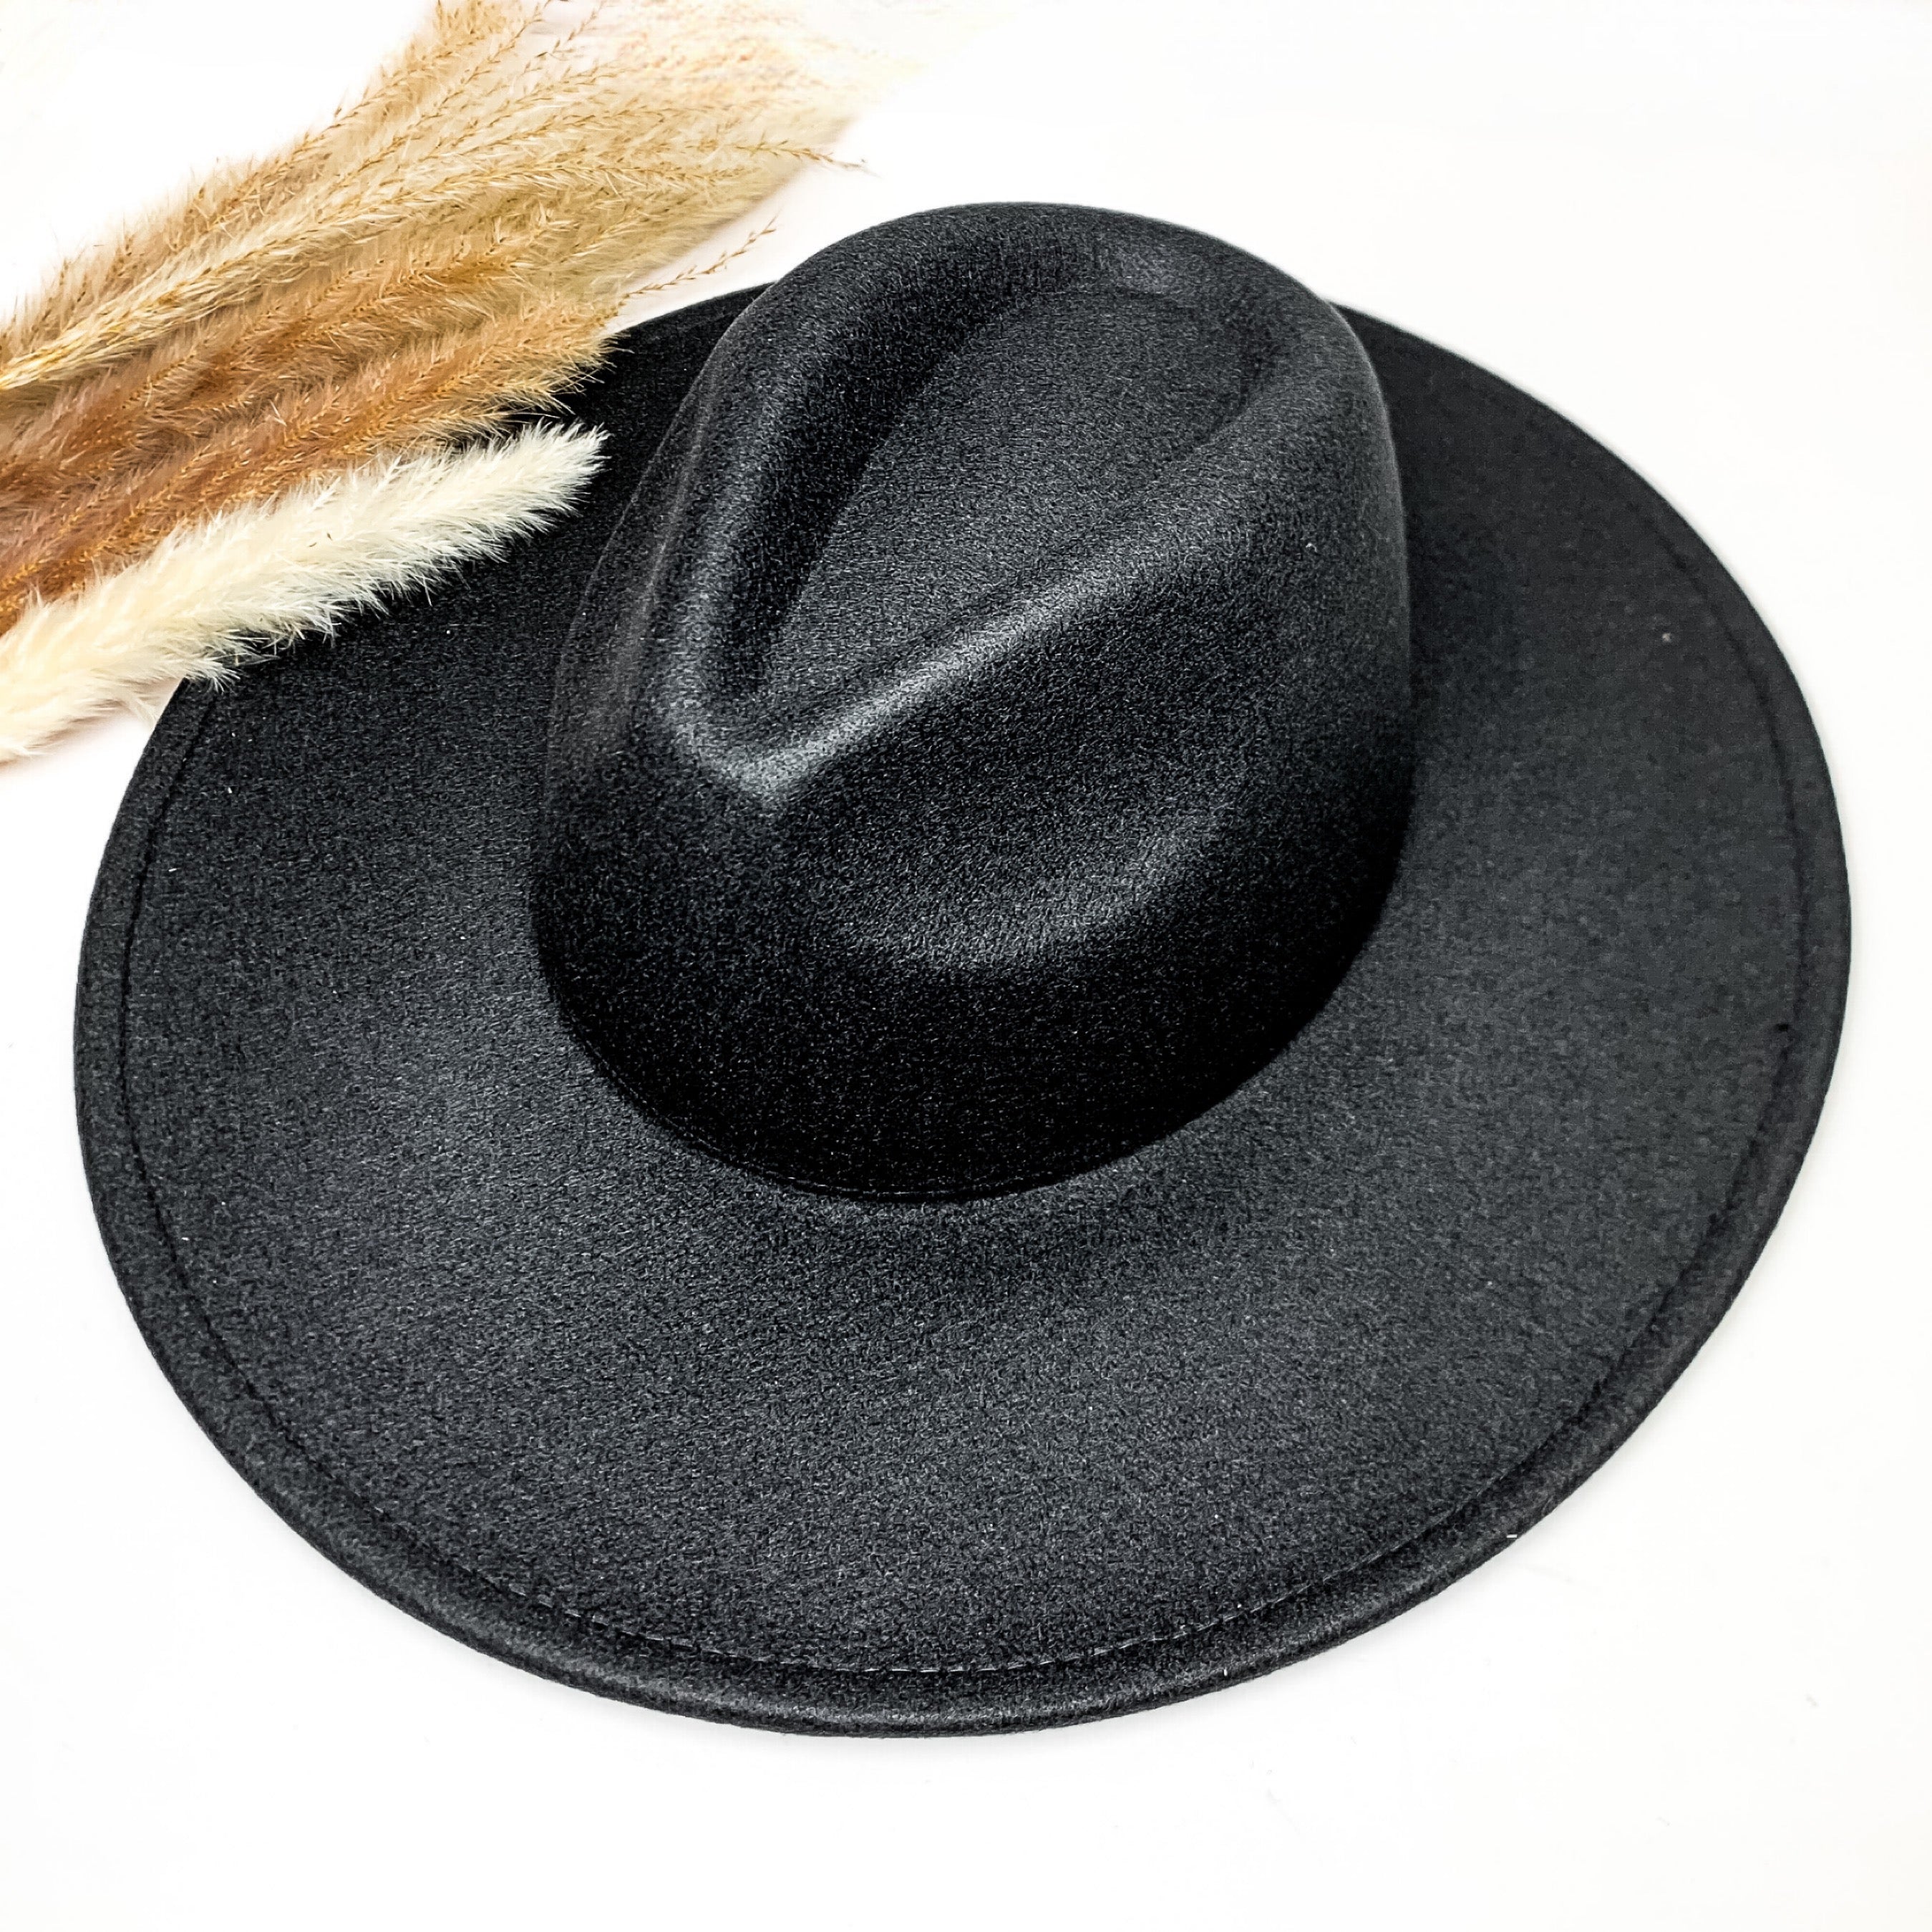 Plain and simple faux felt hat in black color. This hat is sitting on a white background. There is brown and white feathers to the left of the hat.